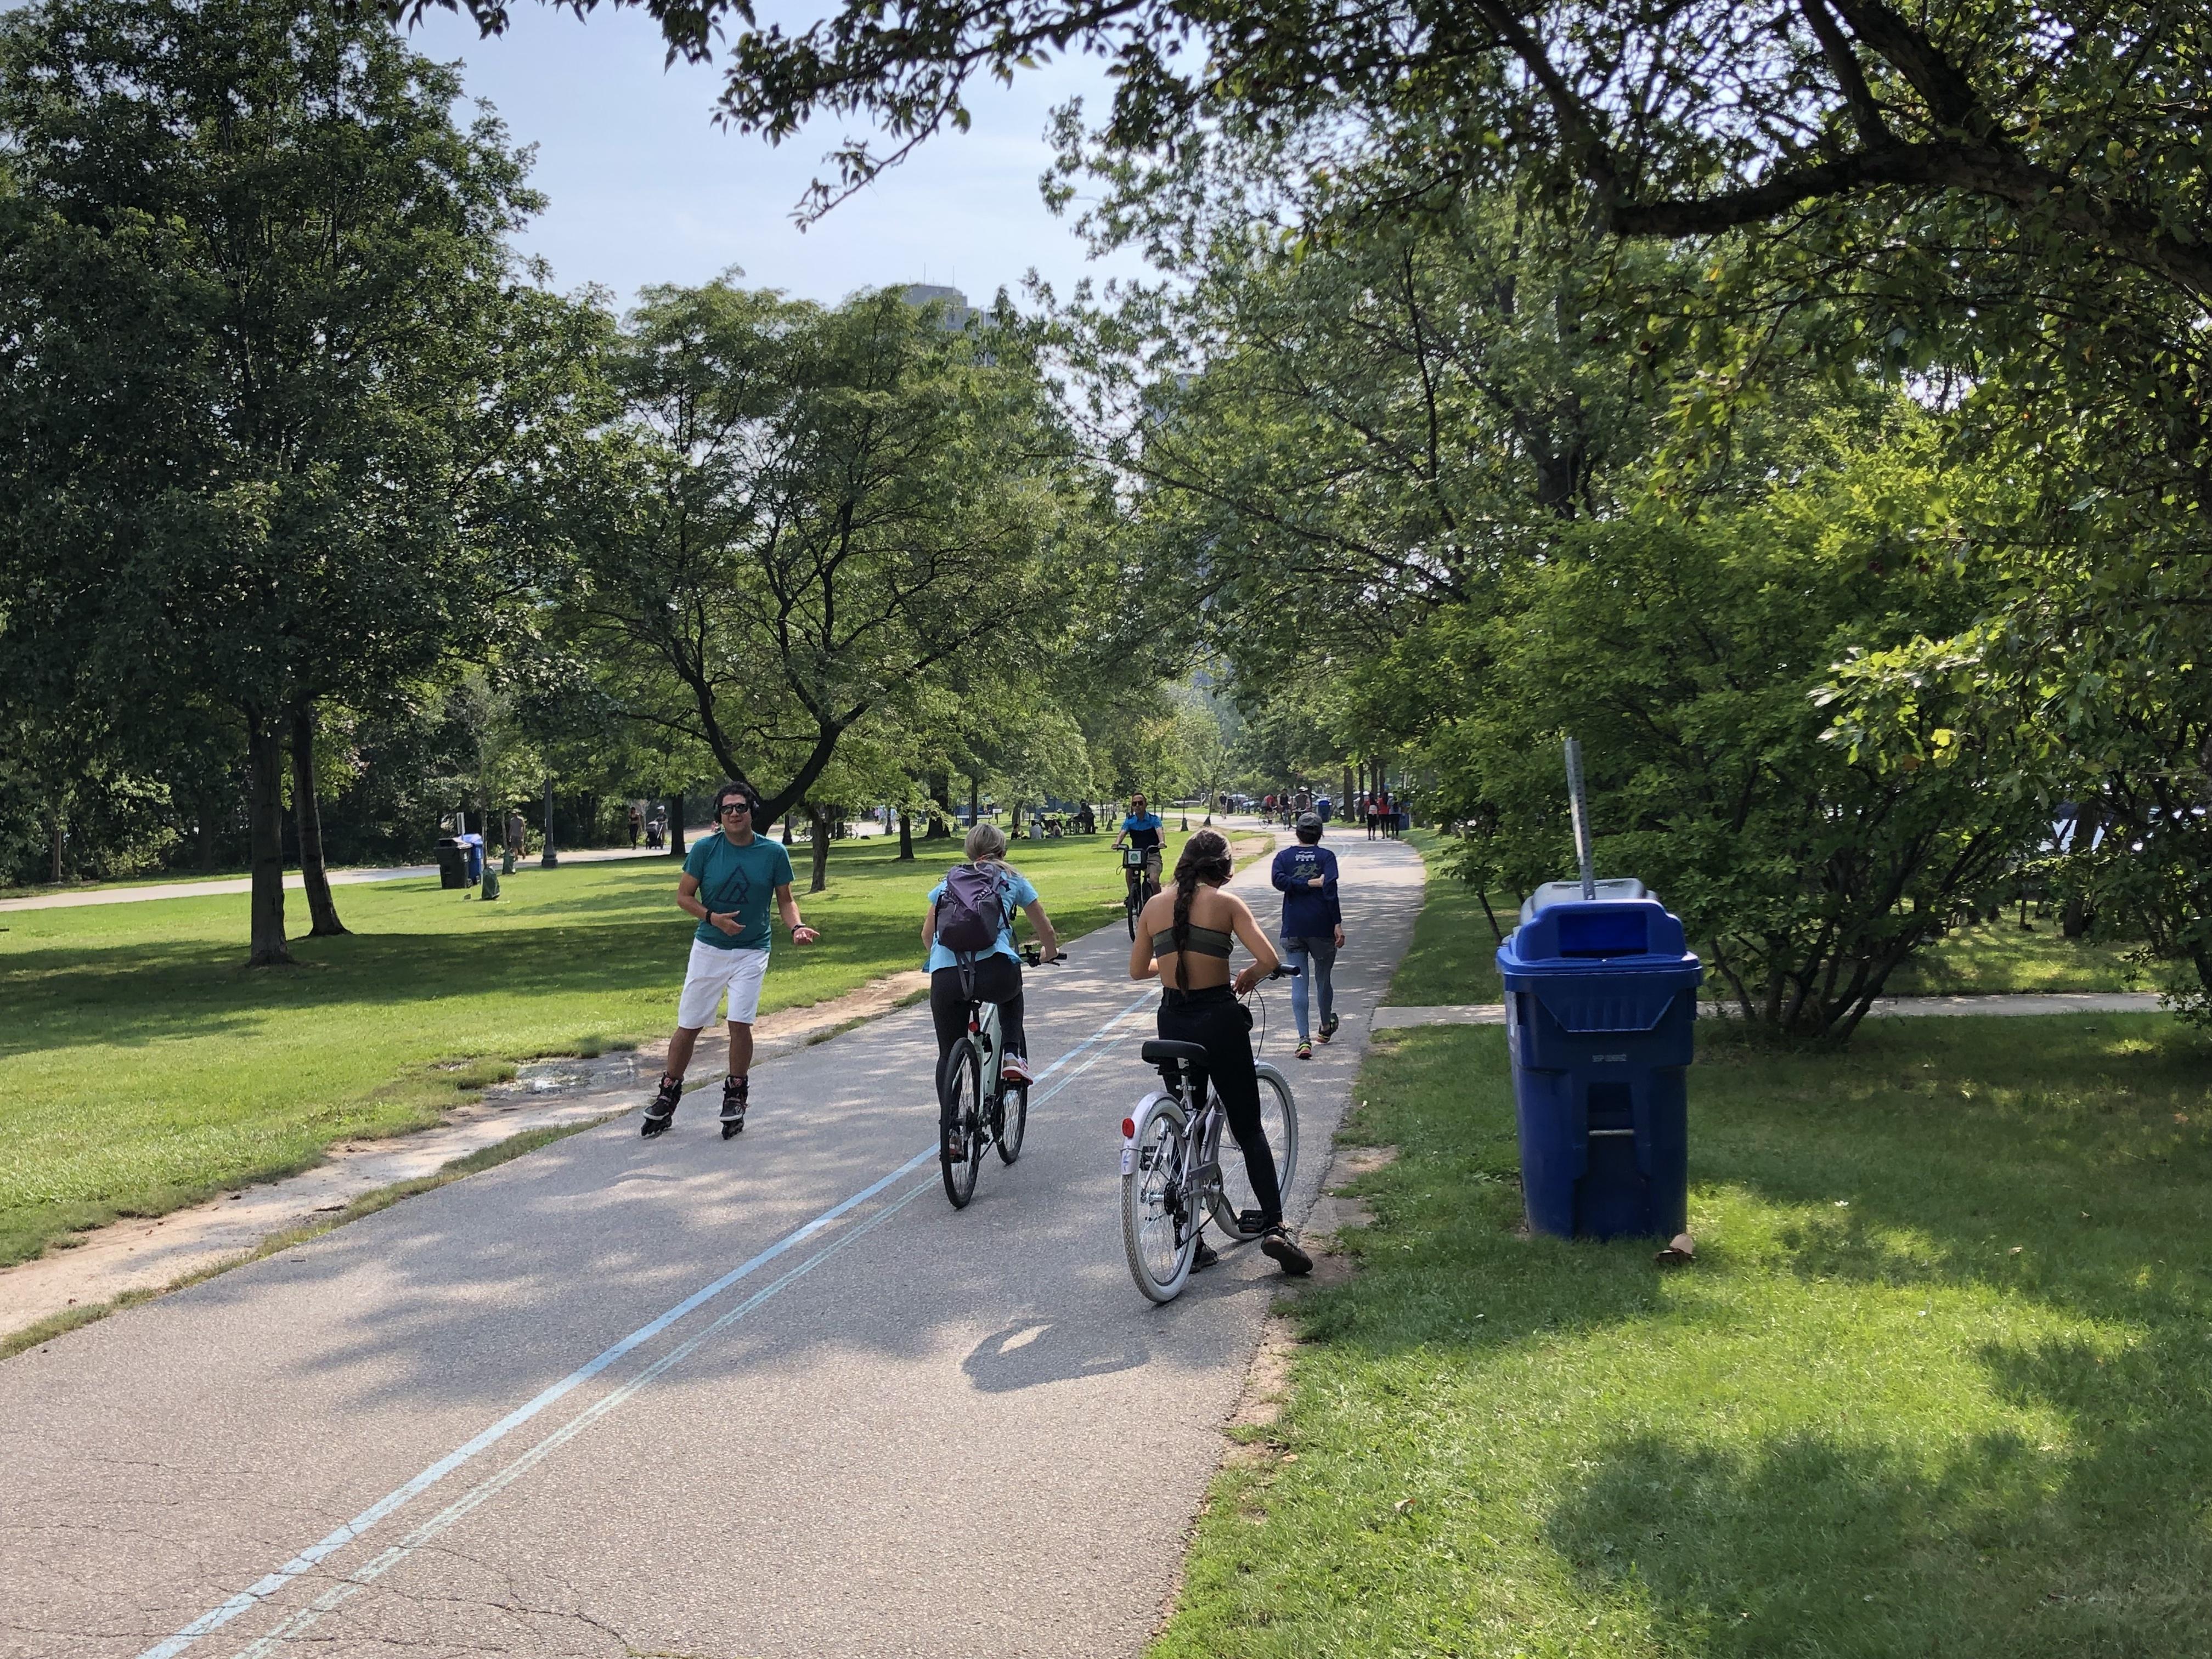 People biking, walking and roller blading on a public multi use path